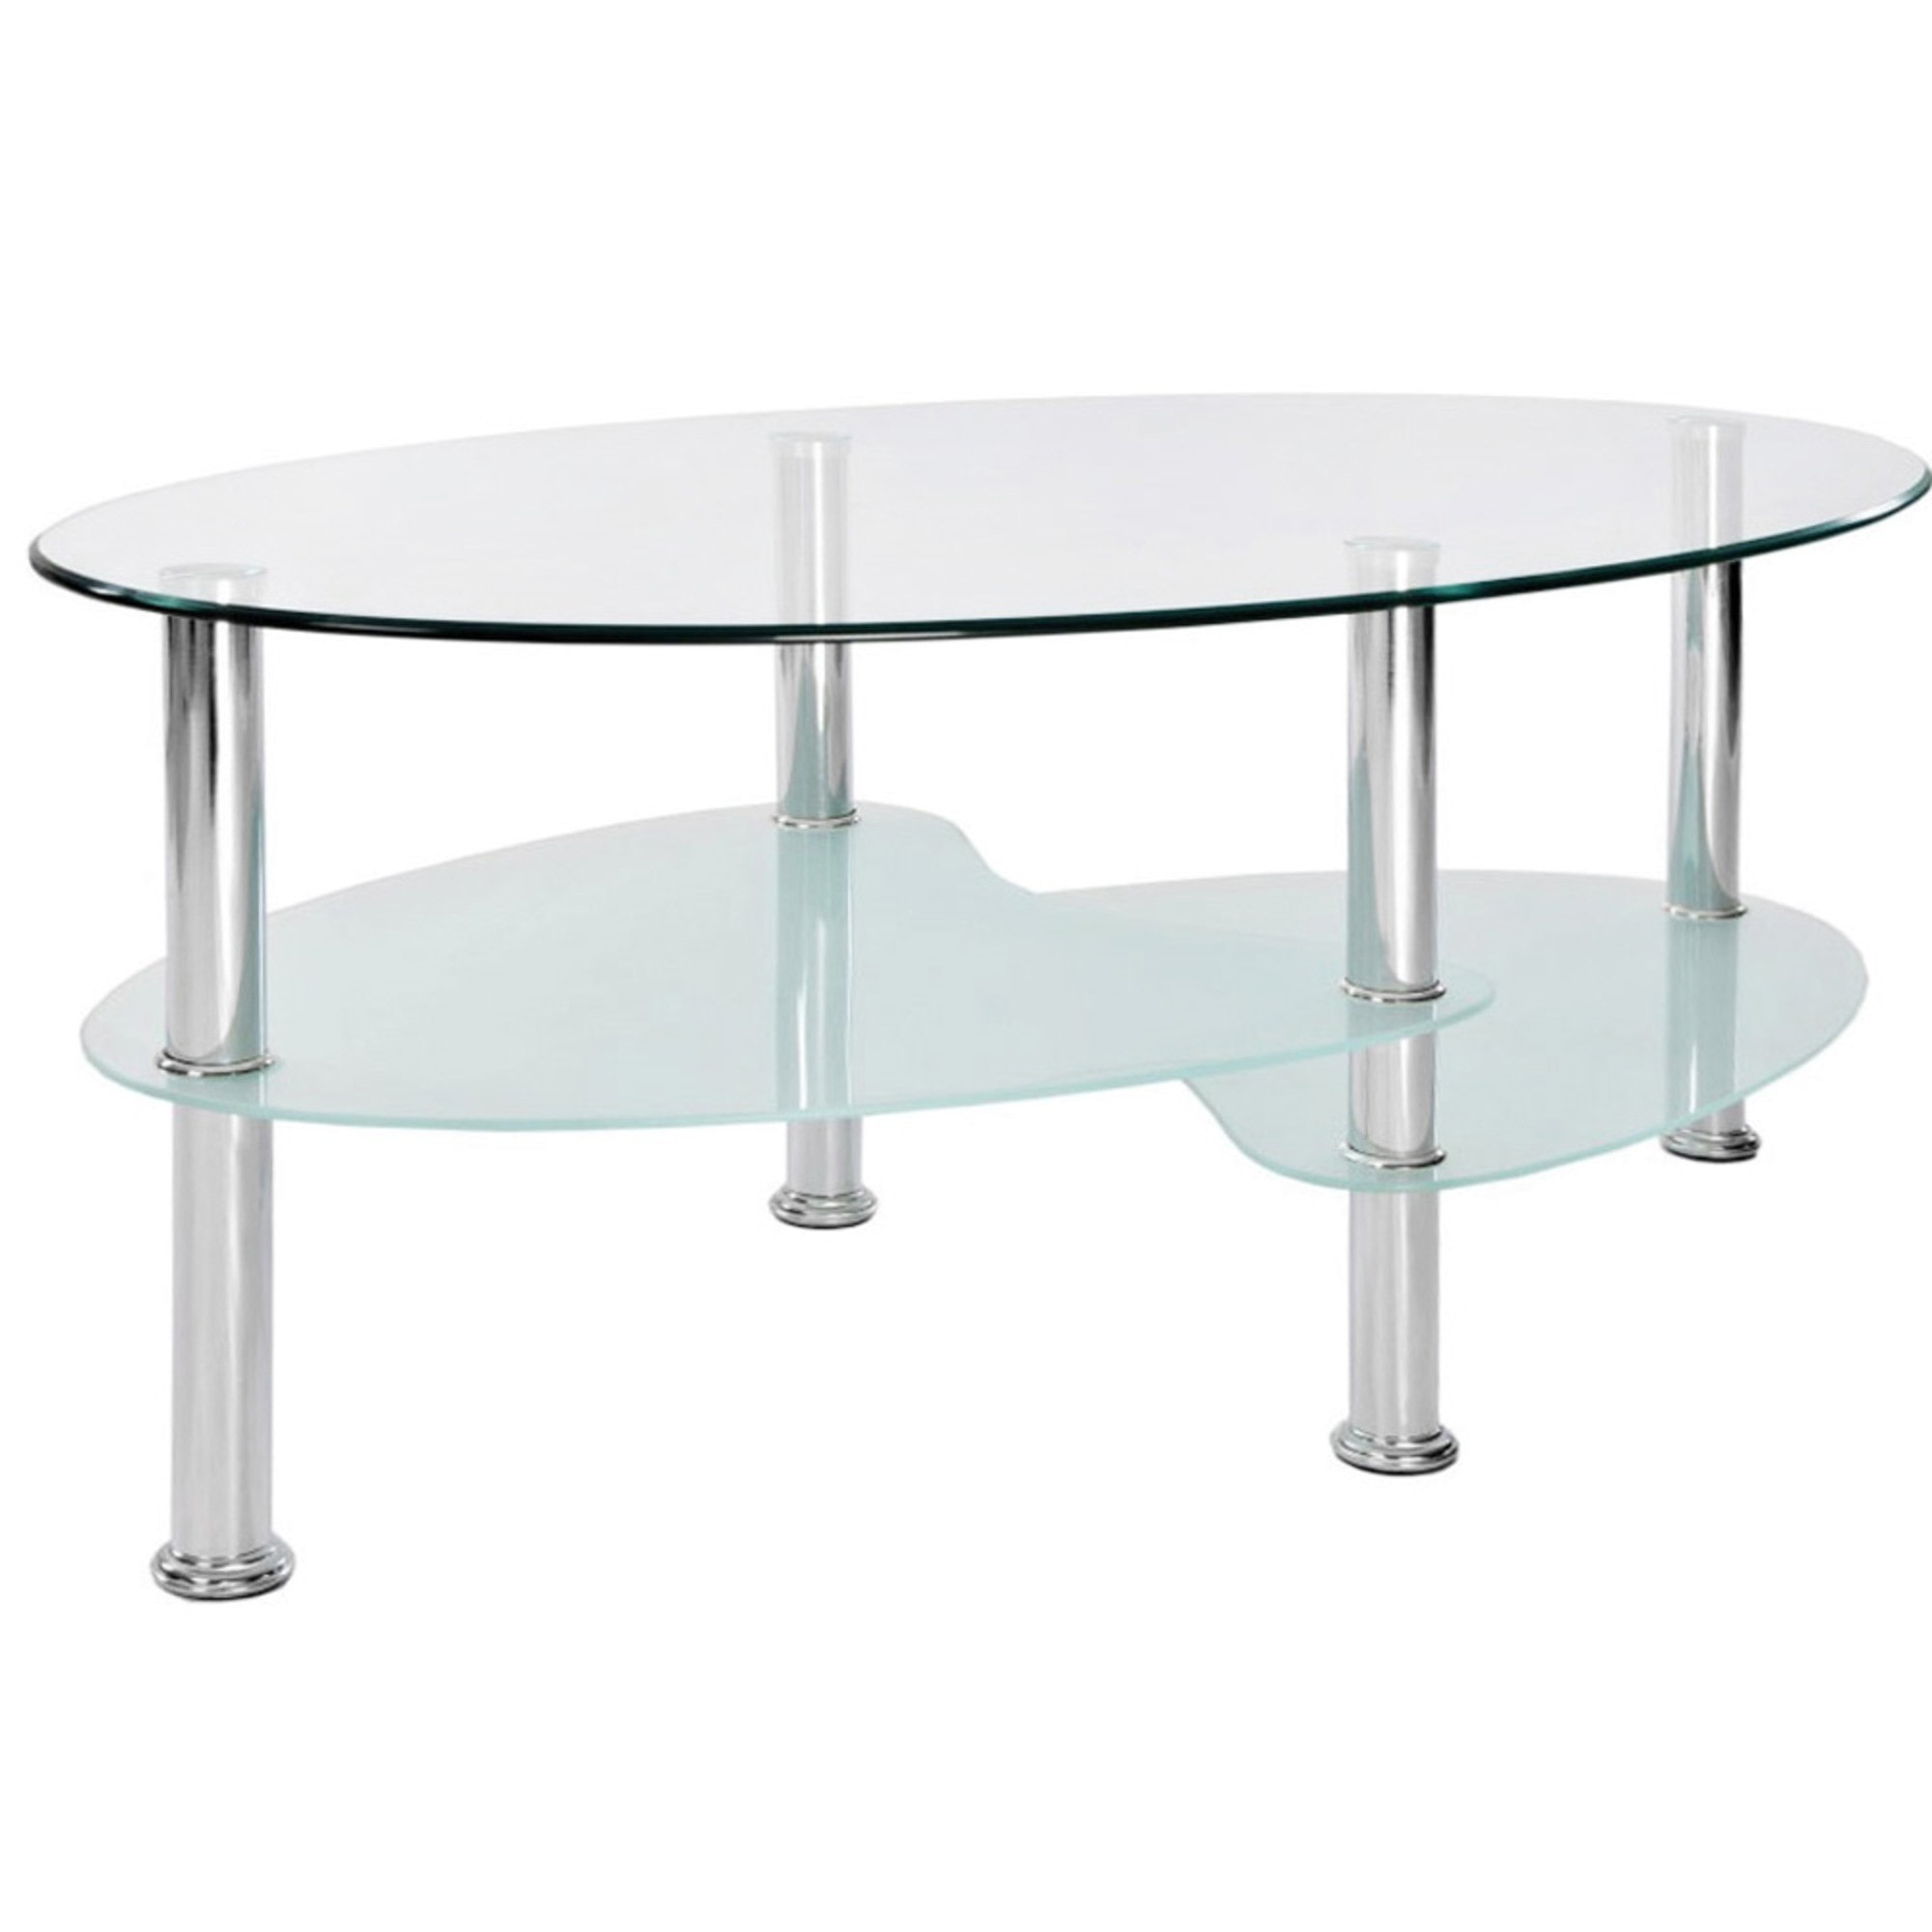 Cara Oval Frosted Glass Coffee Table Dining Glass Furniture in size 2000 X 2000